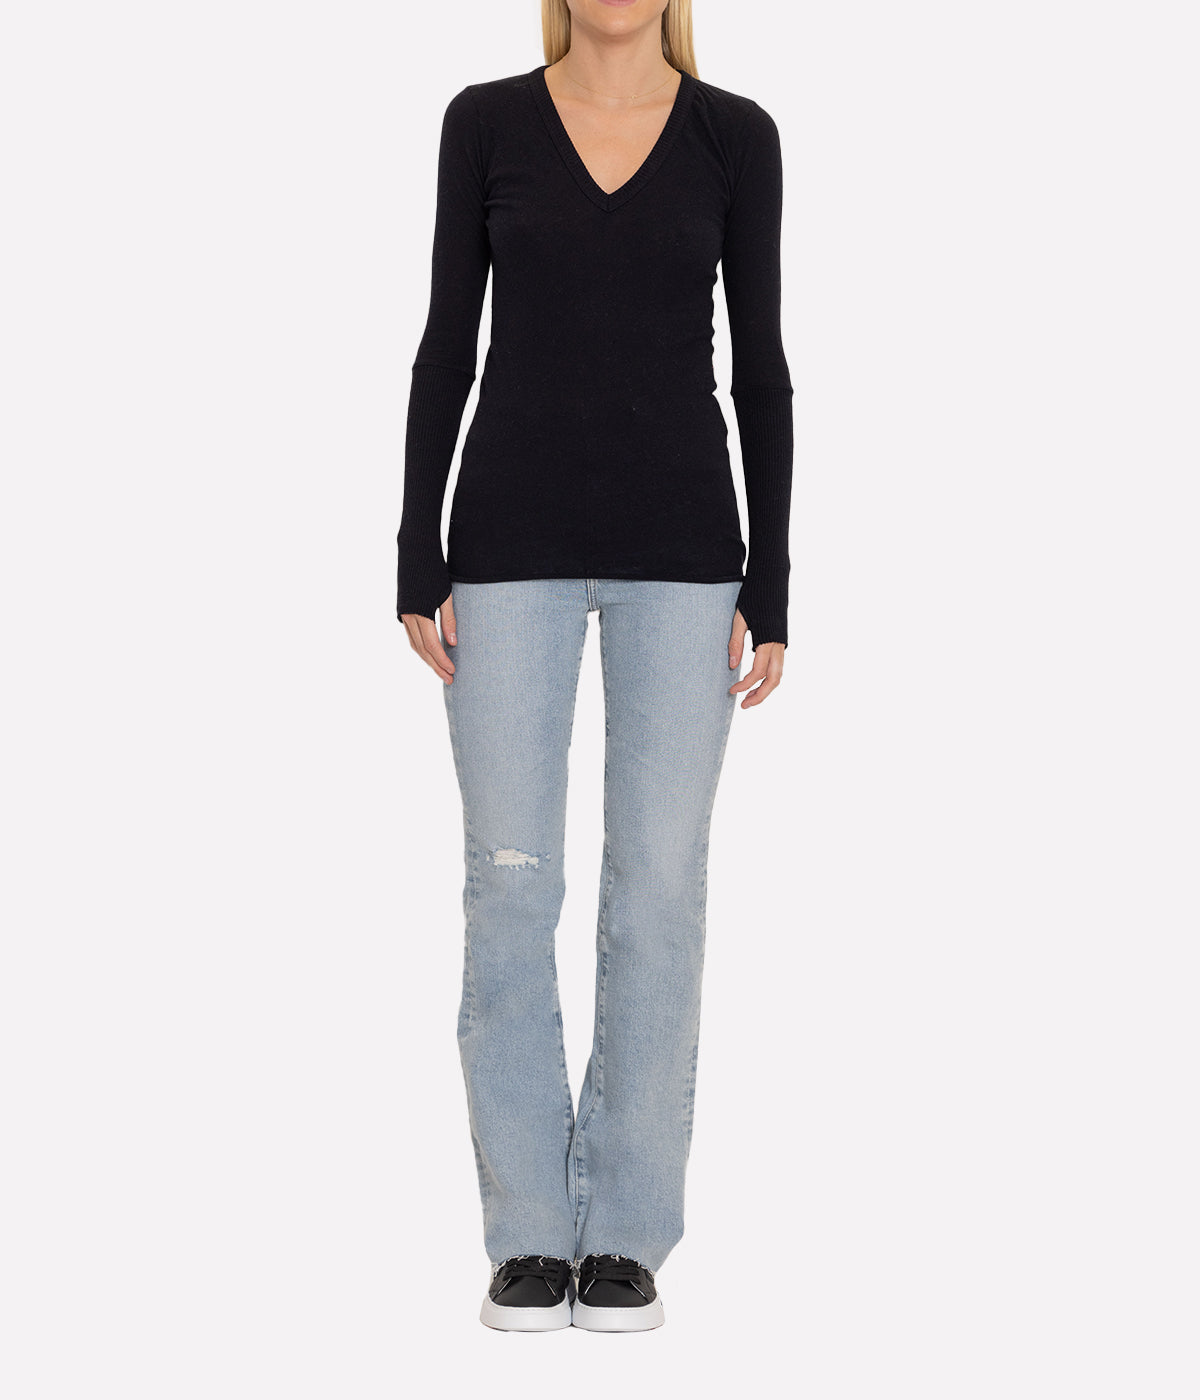 Cashmere V Neck Fitted Long Sleeve Top in Black